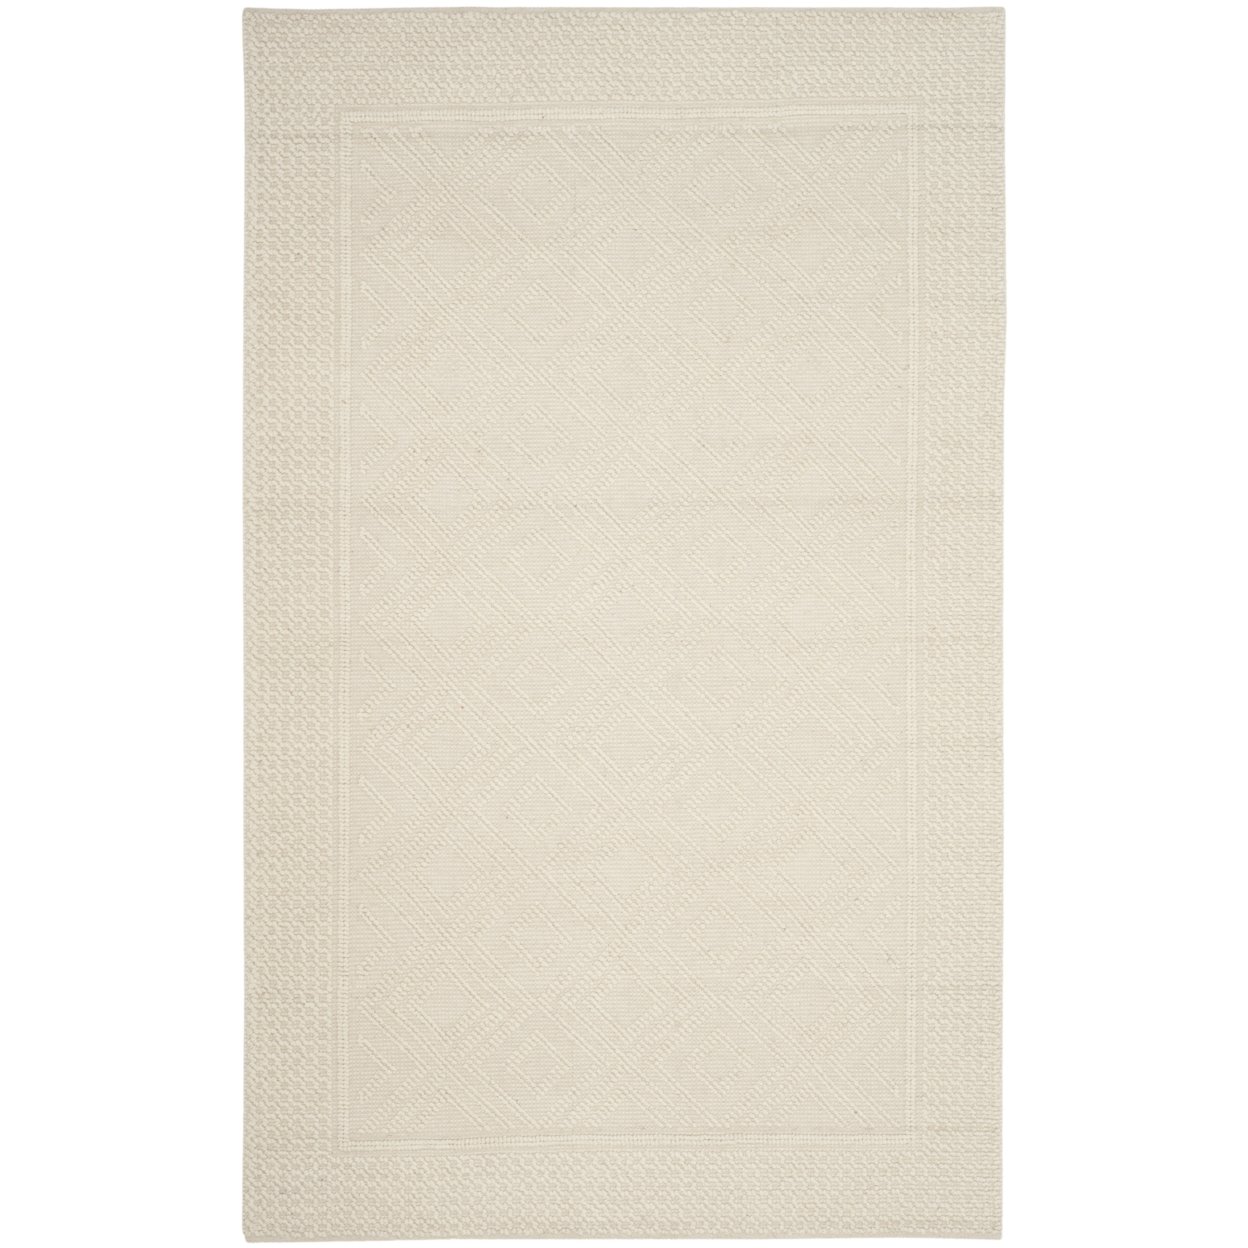 SAFAVIEH Vermont Collection VRM212A Handwoven Ivory Rug - 4 X 6